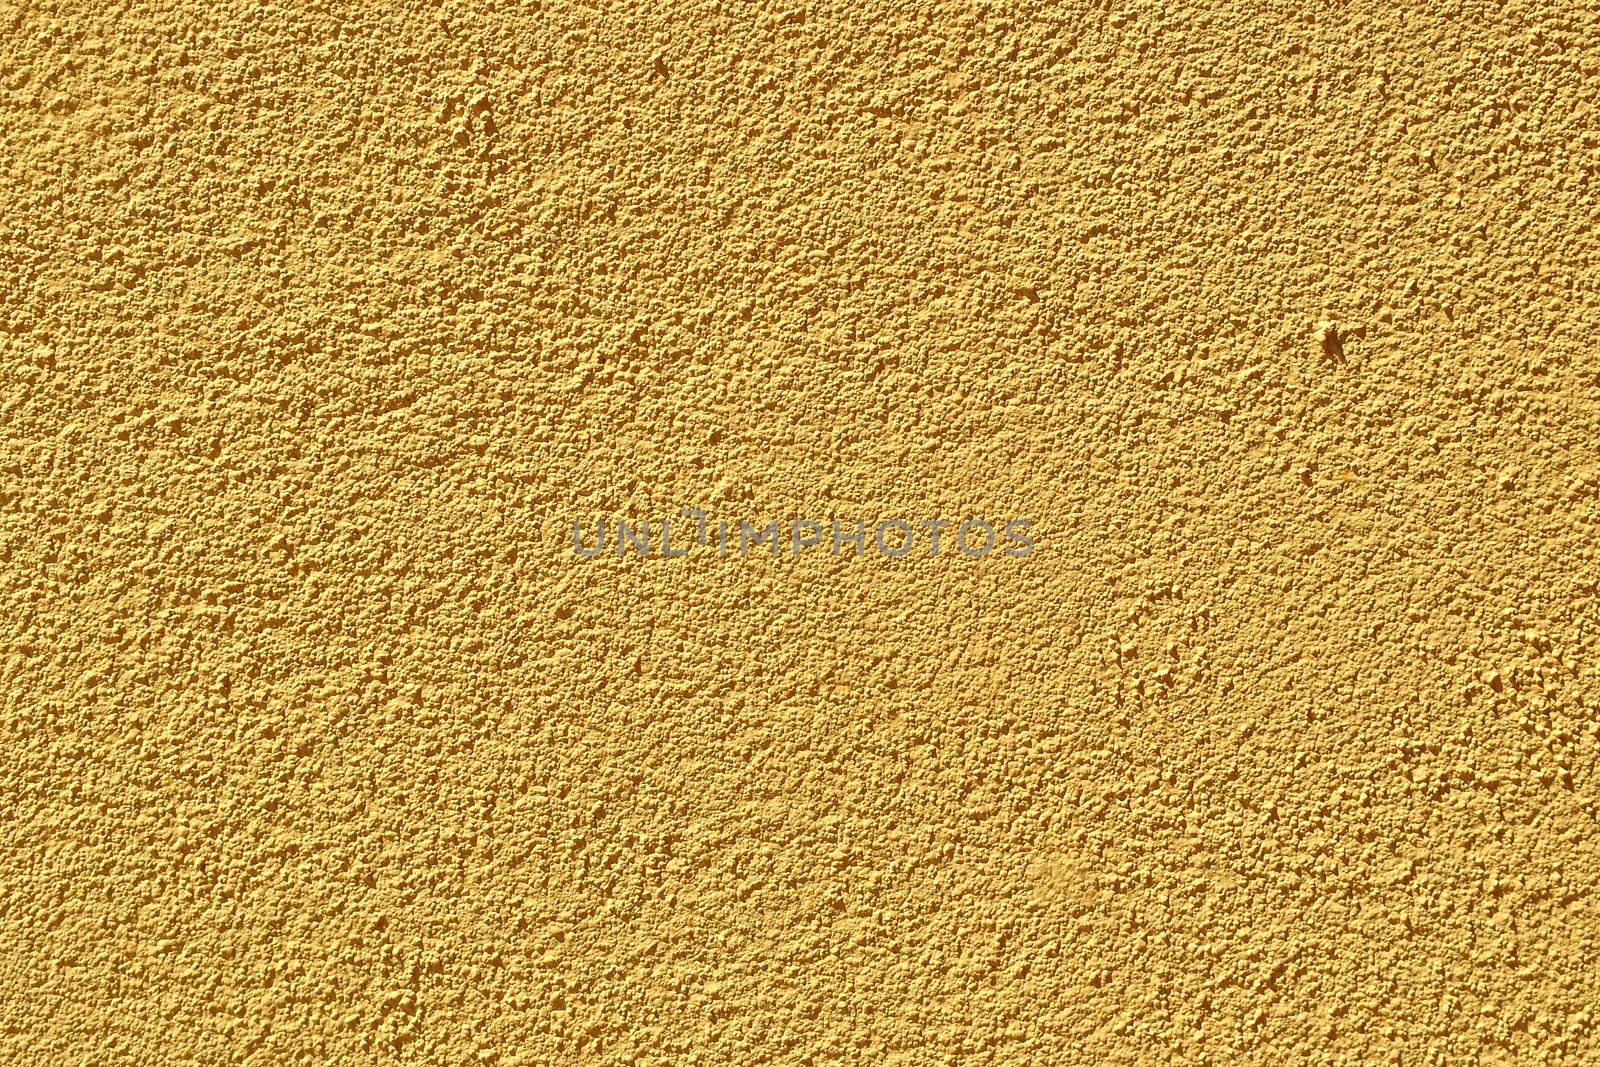 A yellow plaster wall texture / background.